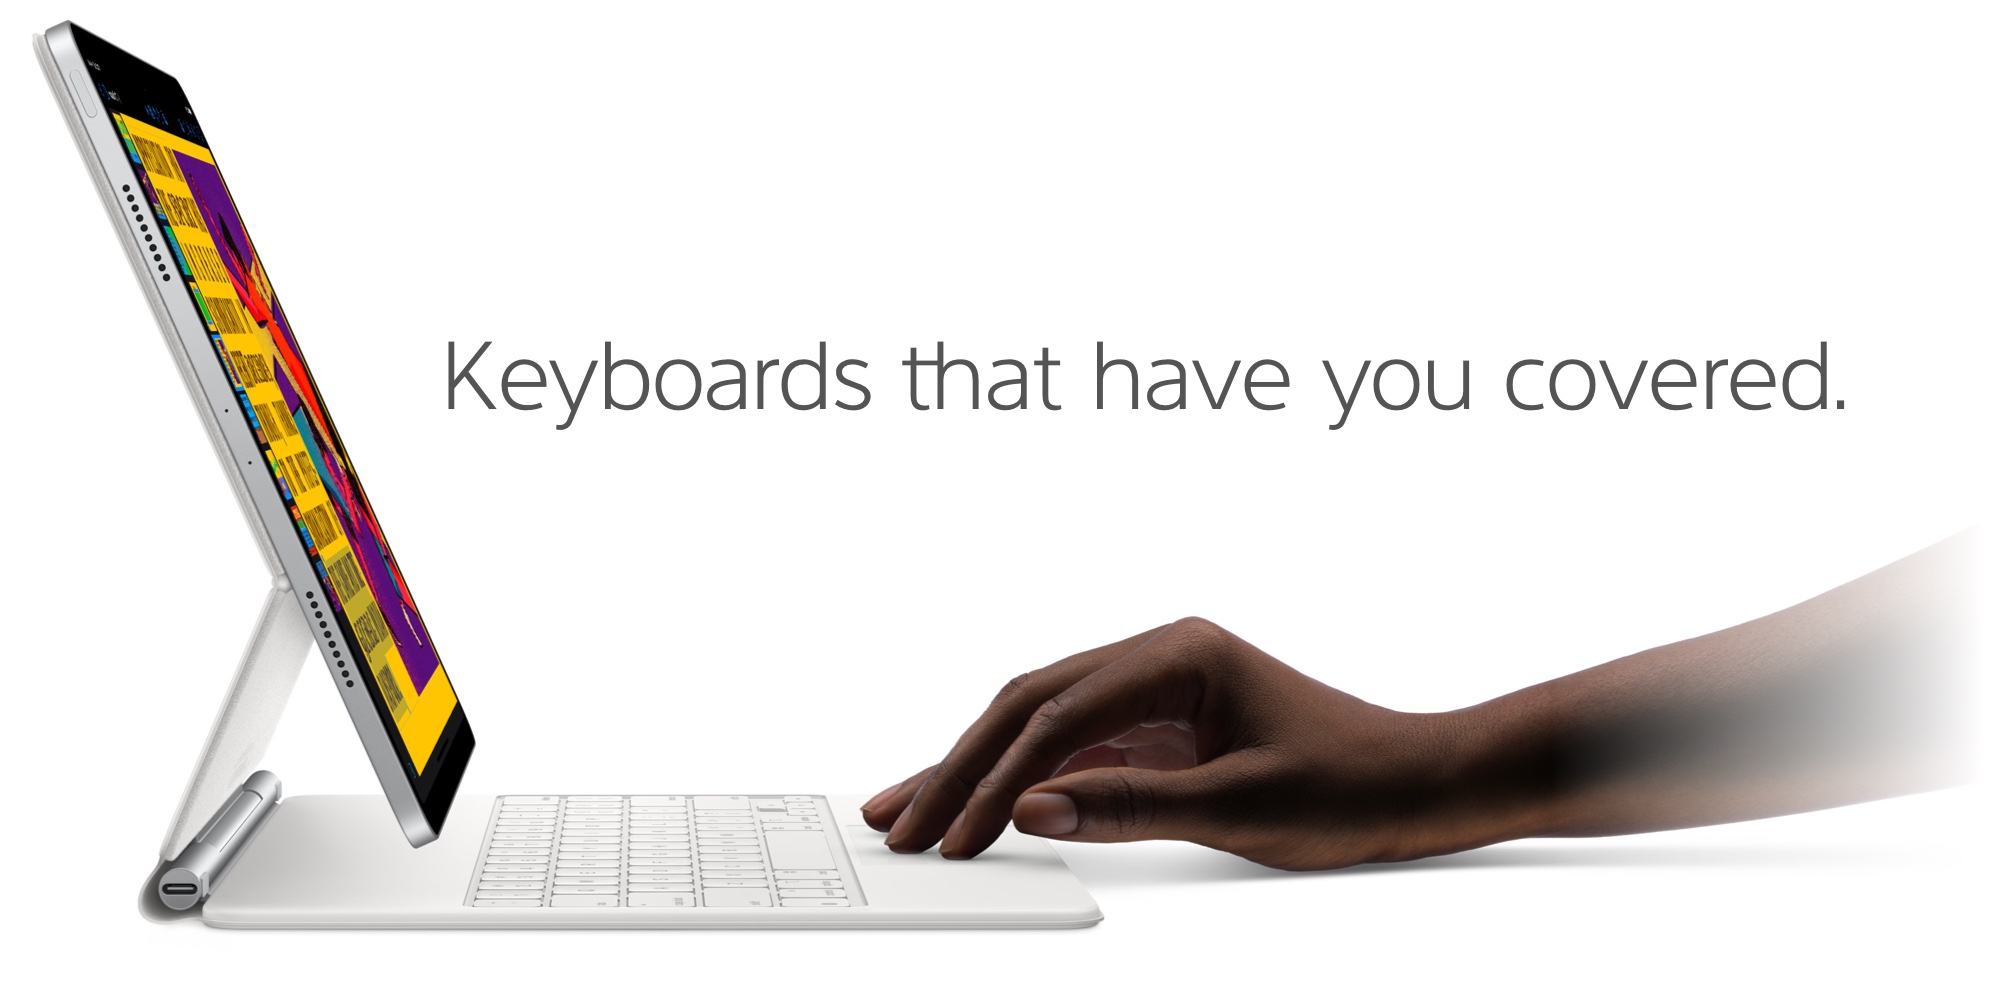 Keyboards that have you covered.